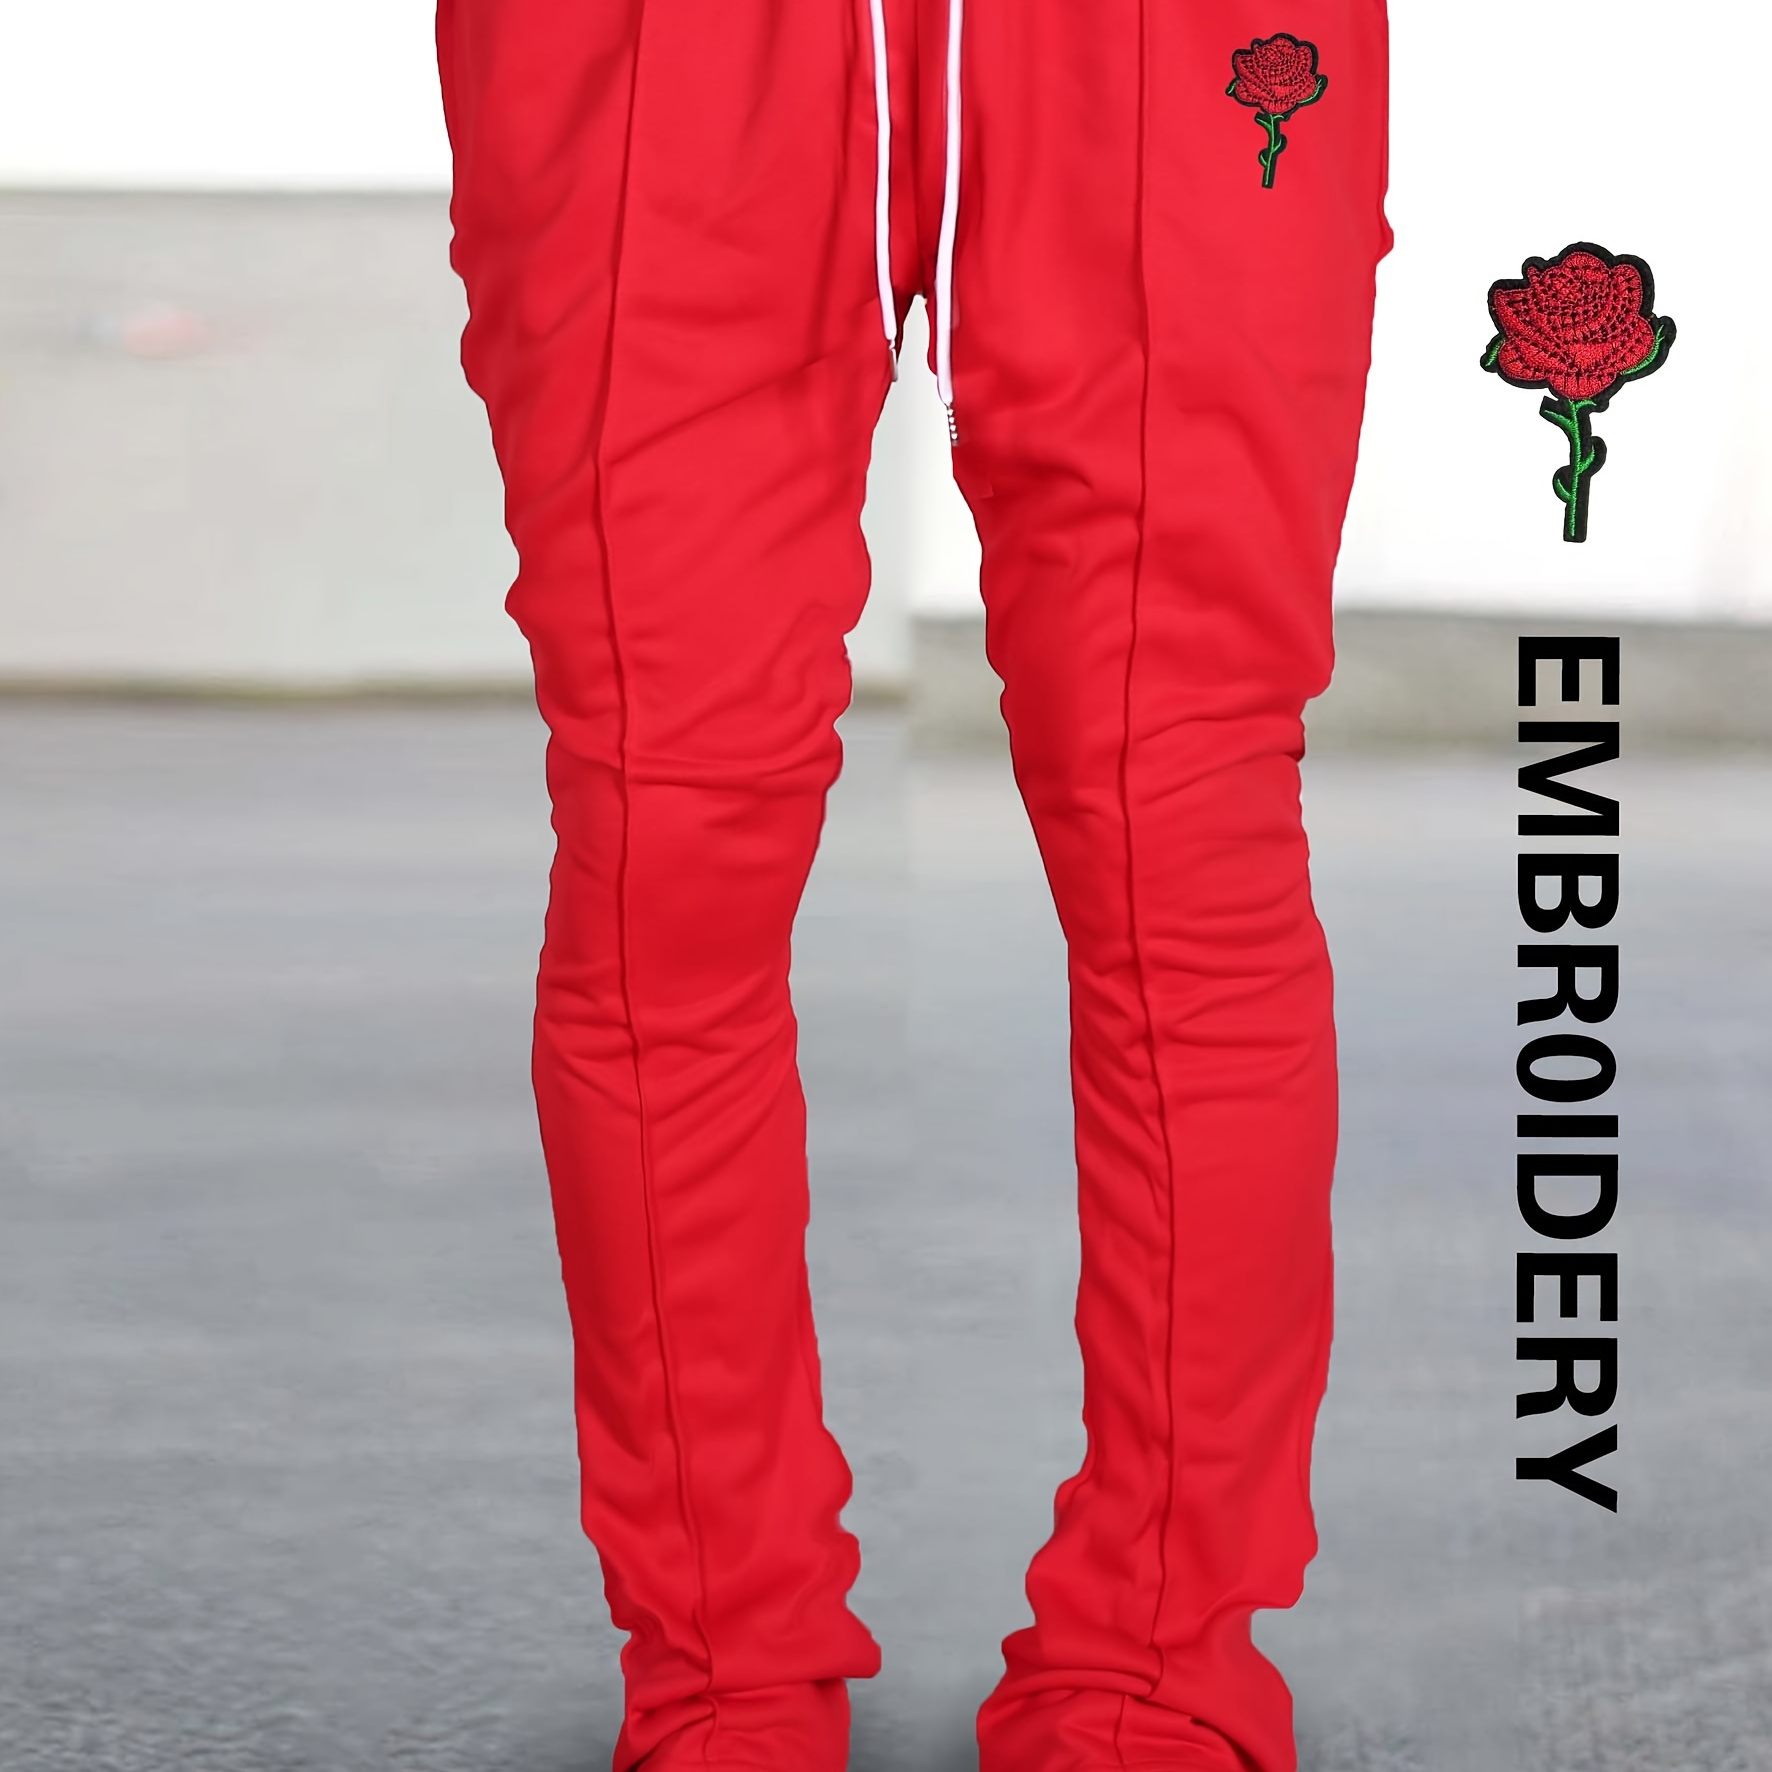 

Red Rose Embroidery, Men's Jogger Pants, Drawstring Sweatpants, Loose Casual Trousers For Spring Autumn Running Jogging Outdoor Fitness Holiday Daily Commute Dates